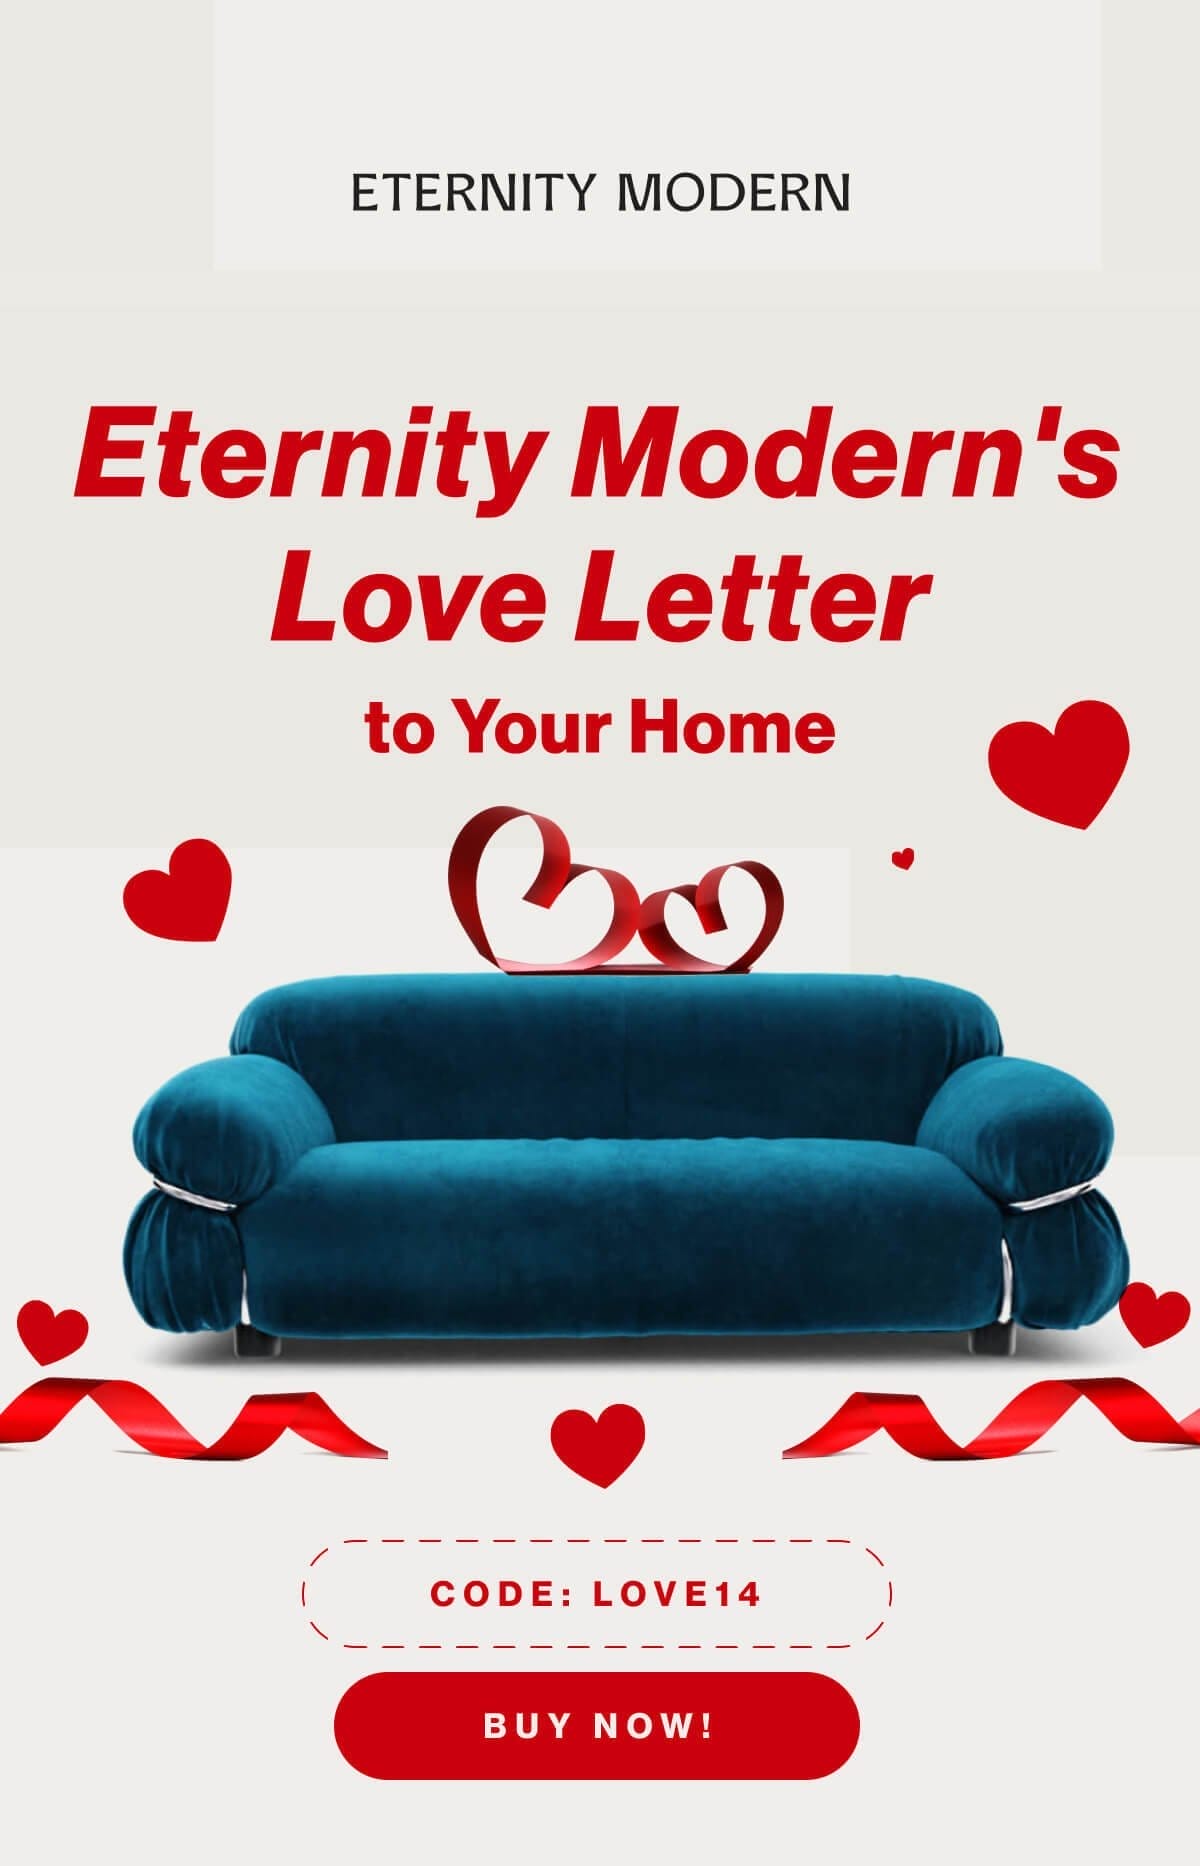 Eternity Modern's Love Letter to Your Home - Code: LOVE14 - Buy Now!